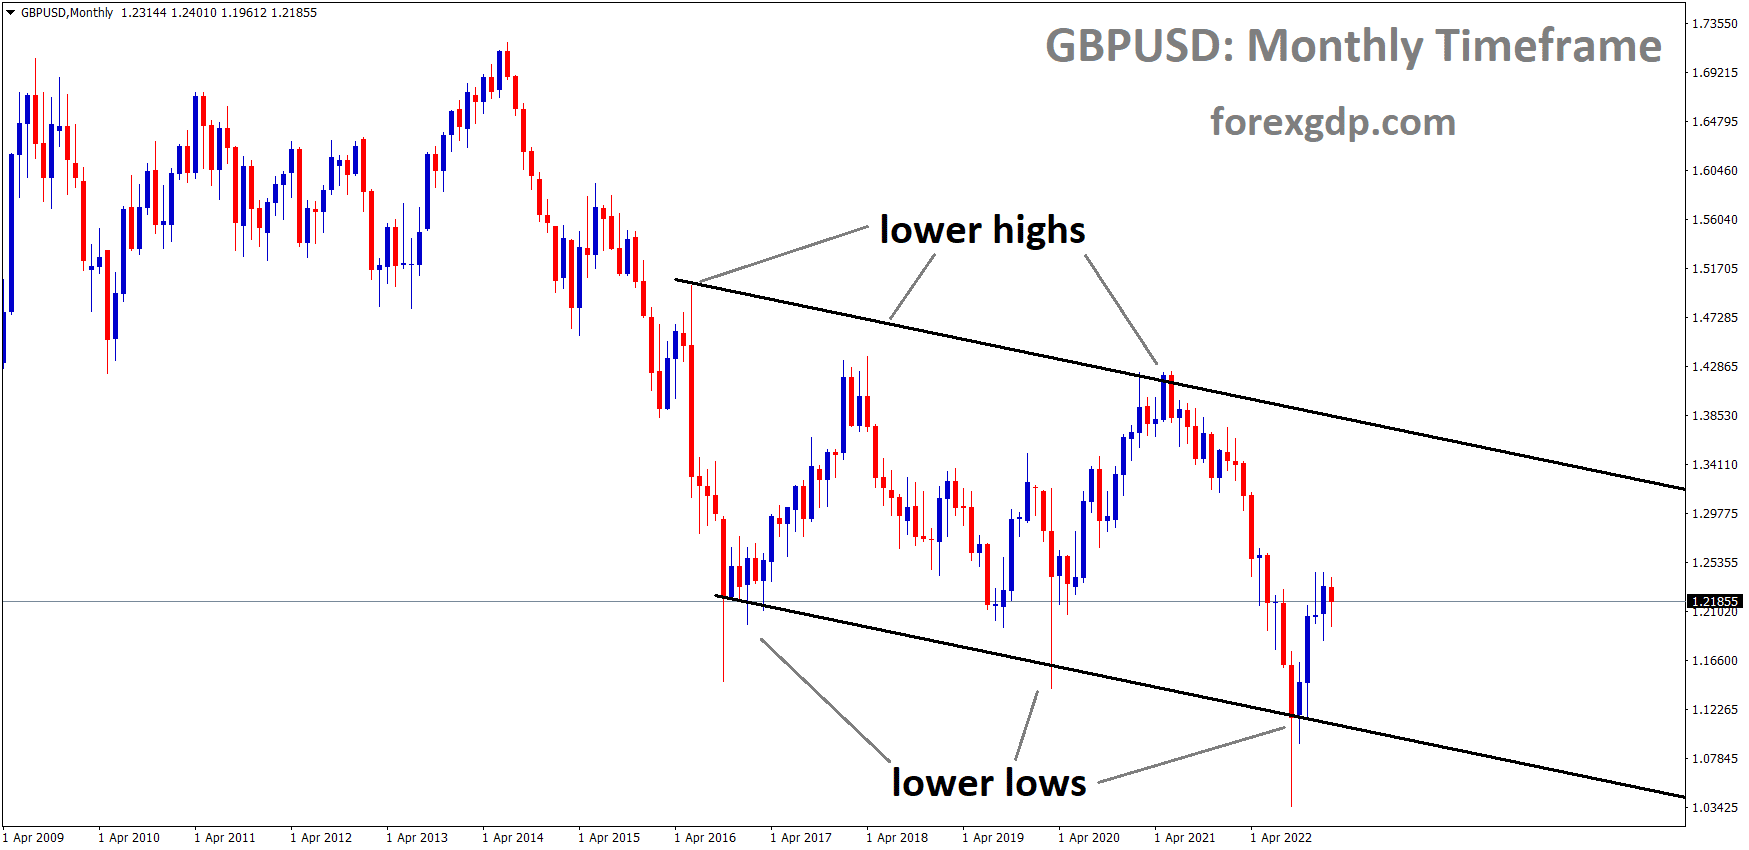 GBPUSD Monthly TF analysis Market is moving in the Descending channel and the market has rebounded from the lower low area of the channel